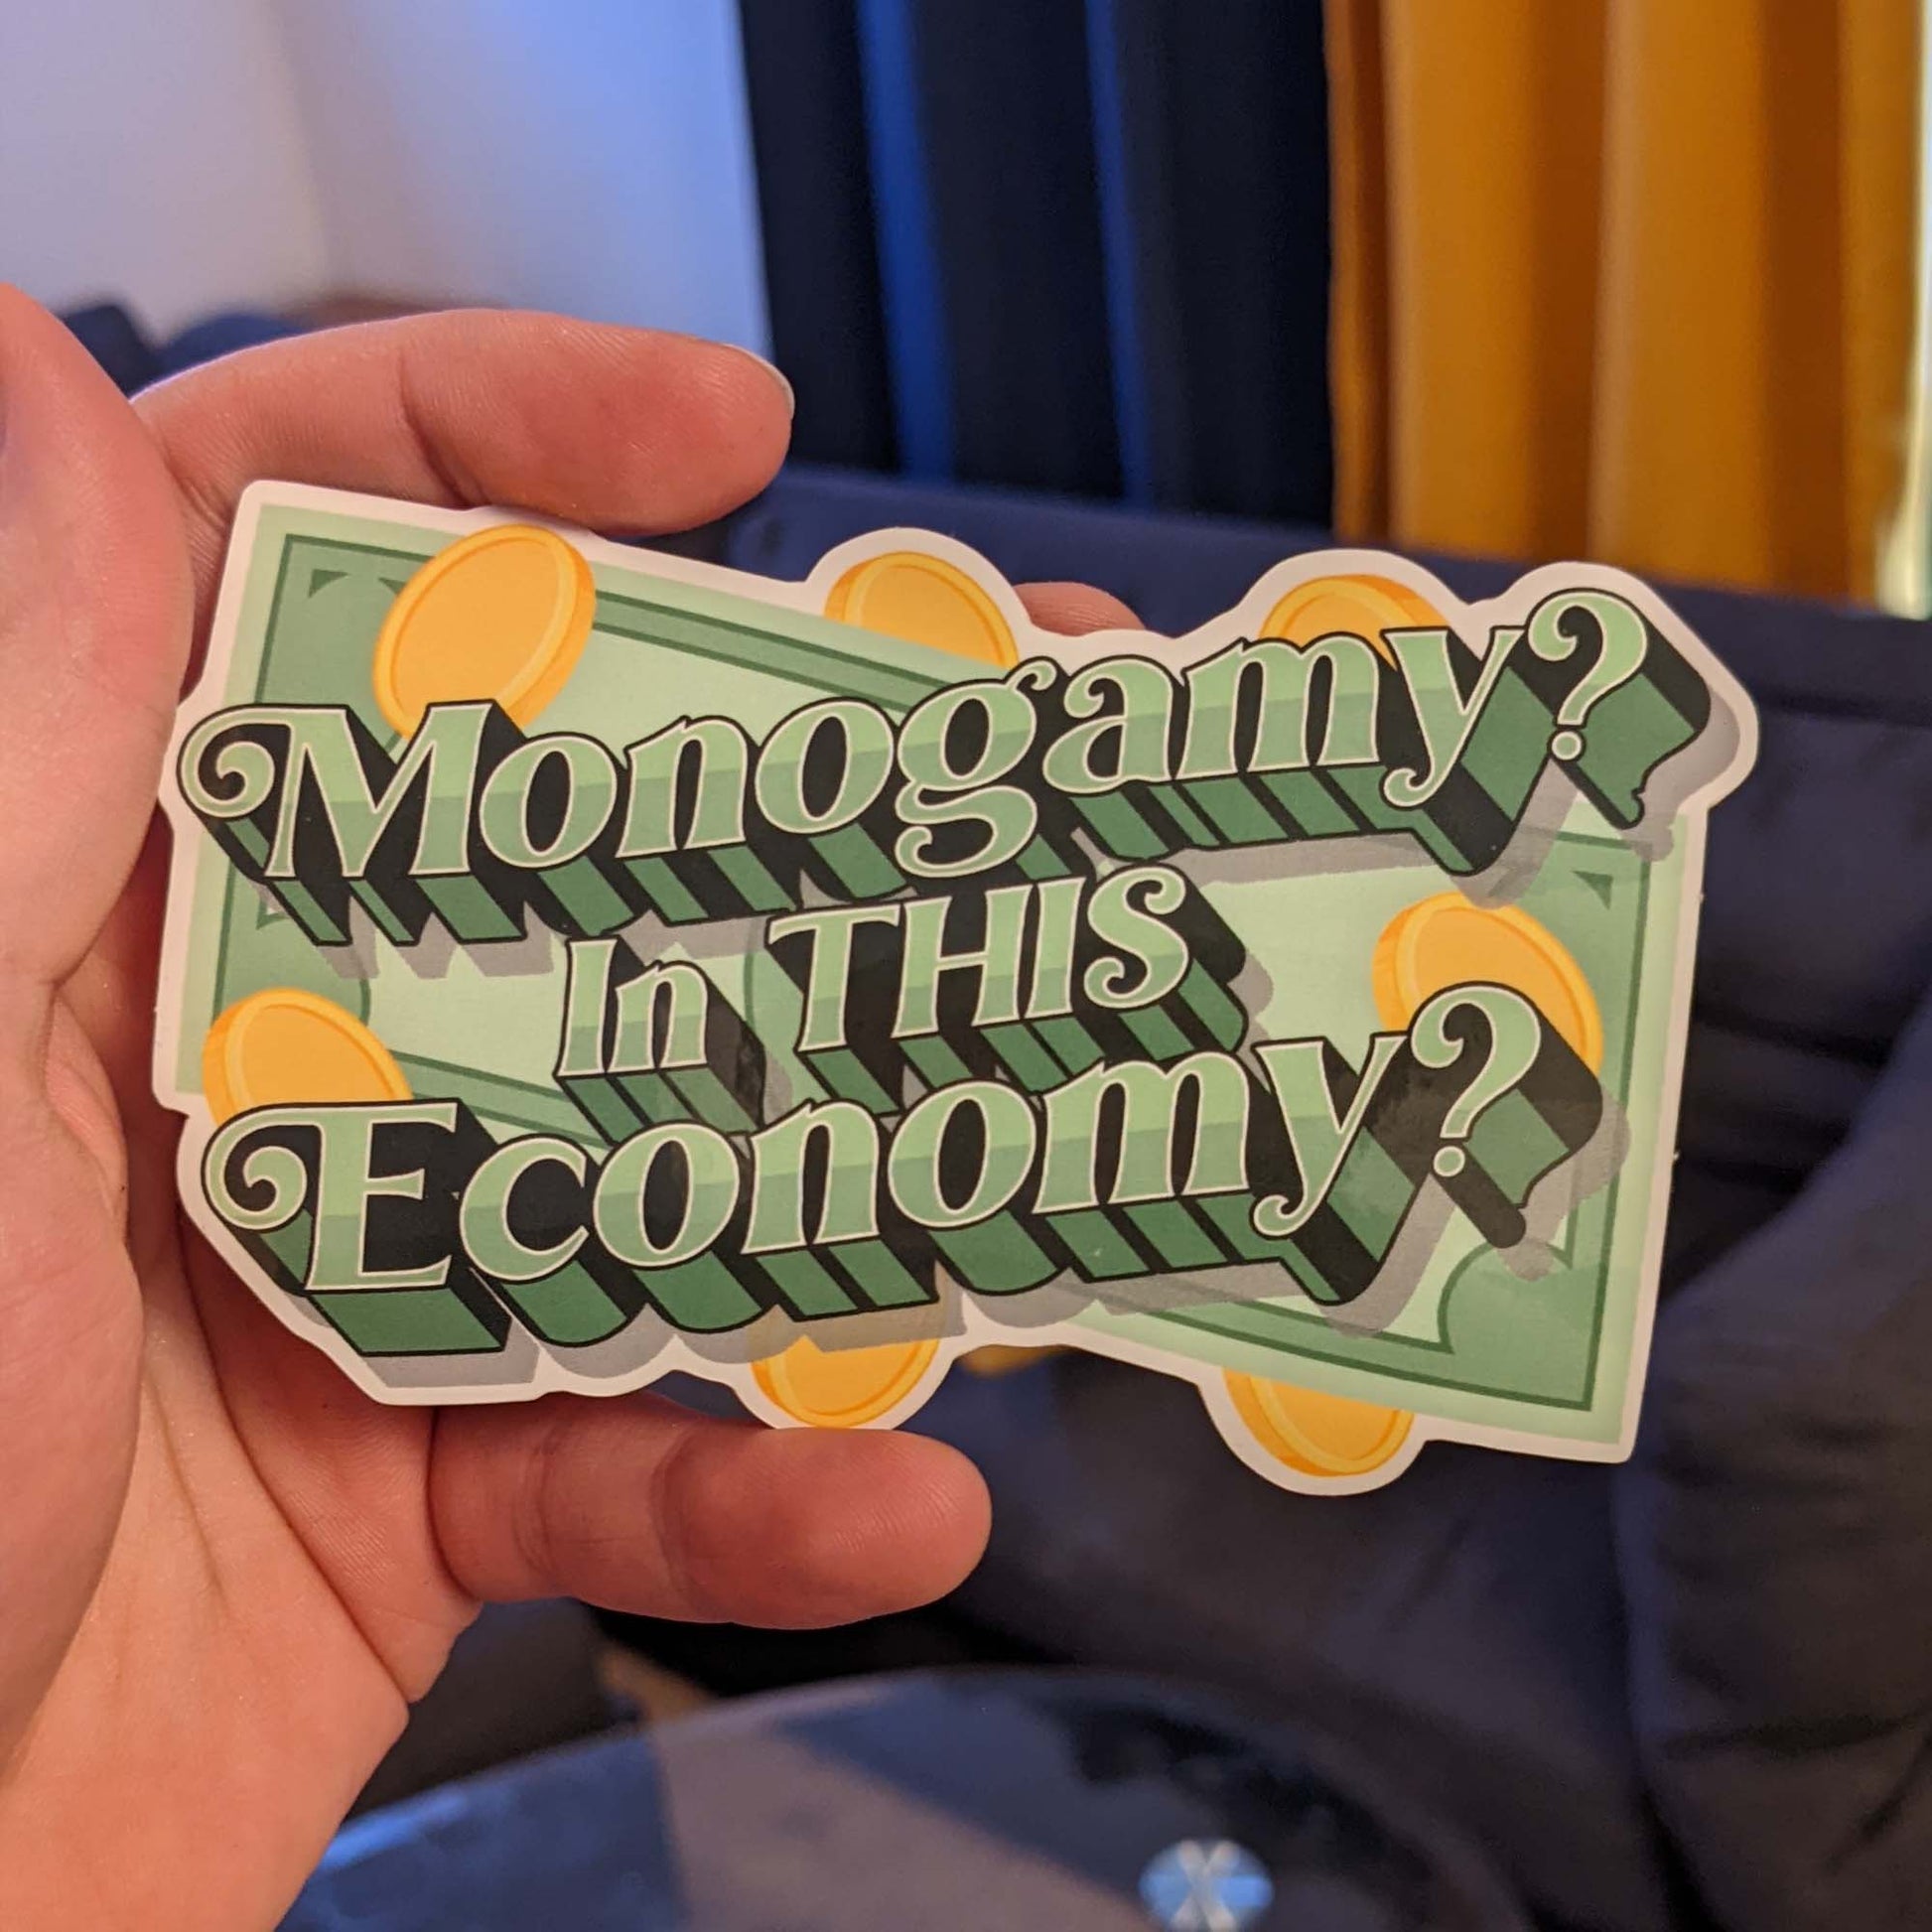 Another Mood Object Sticker, 03 Monocity